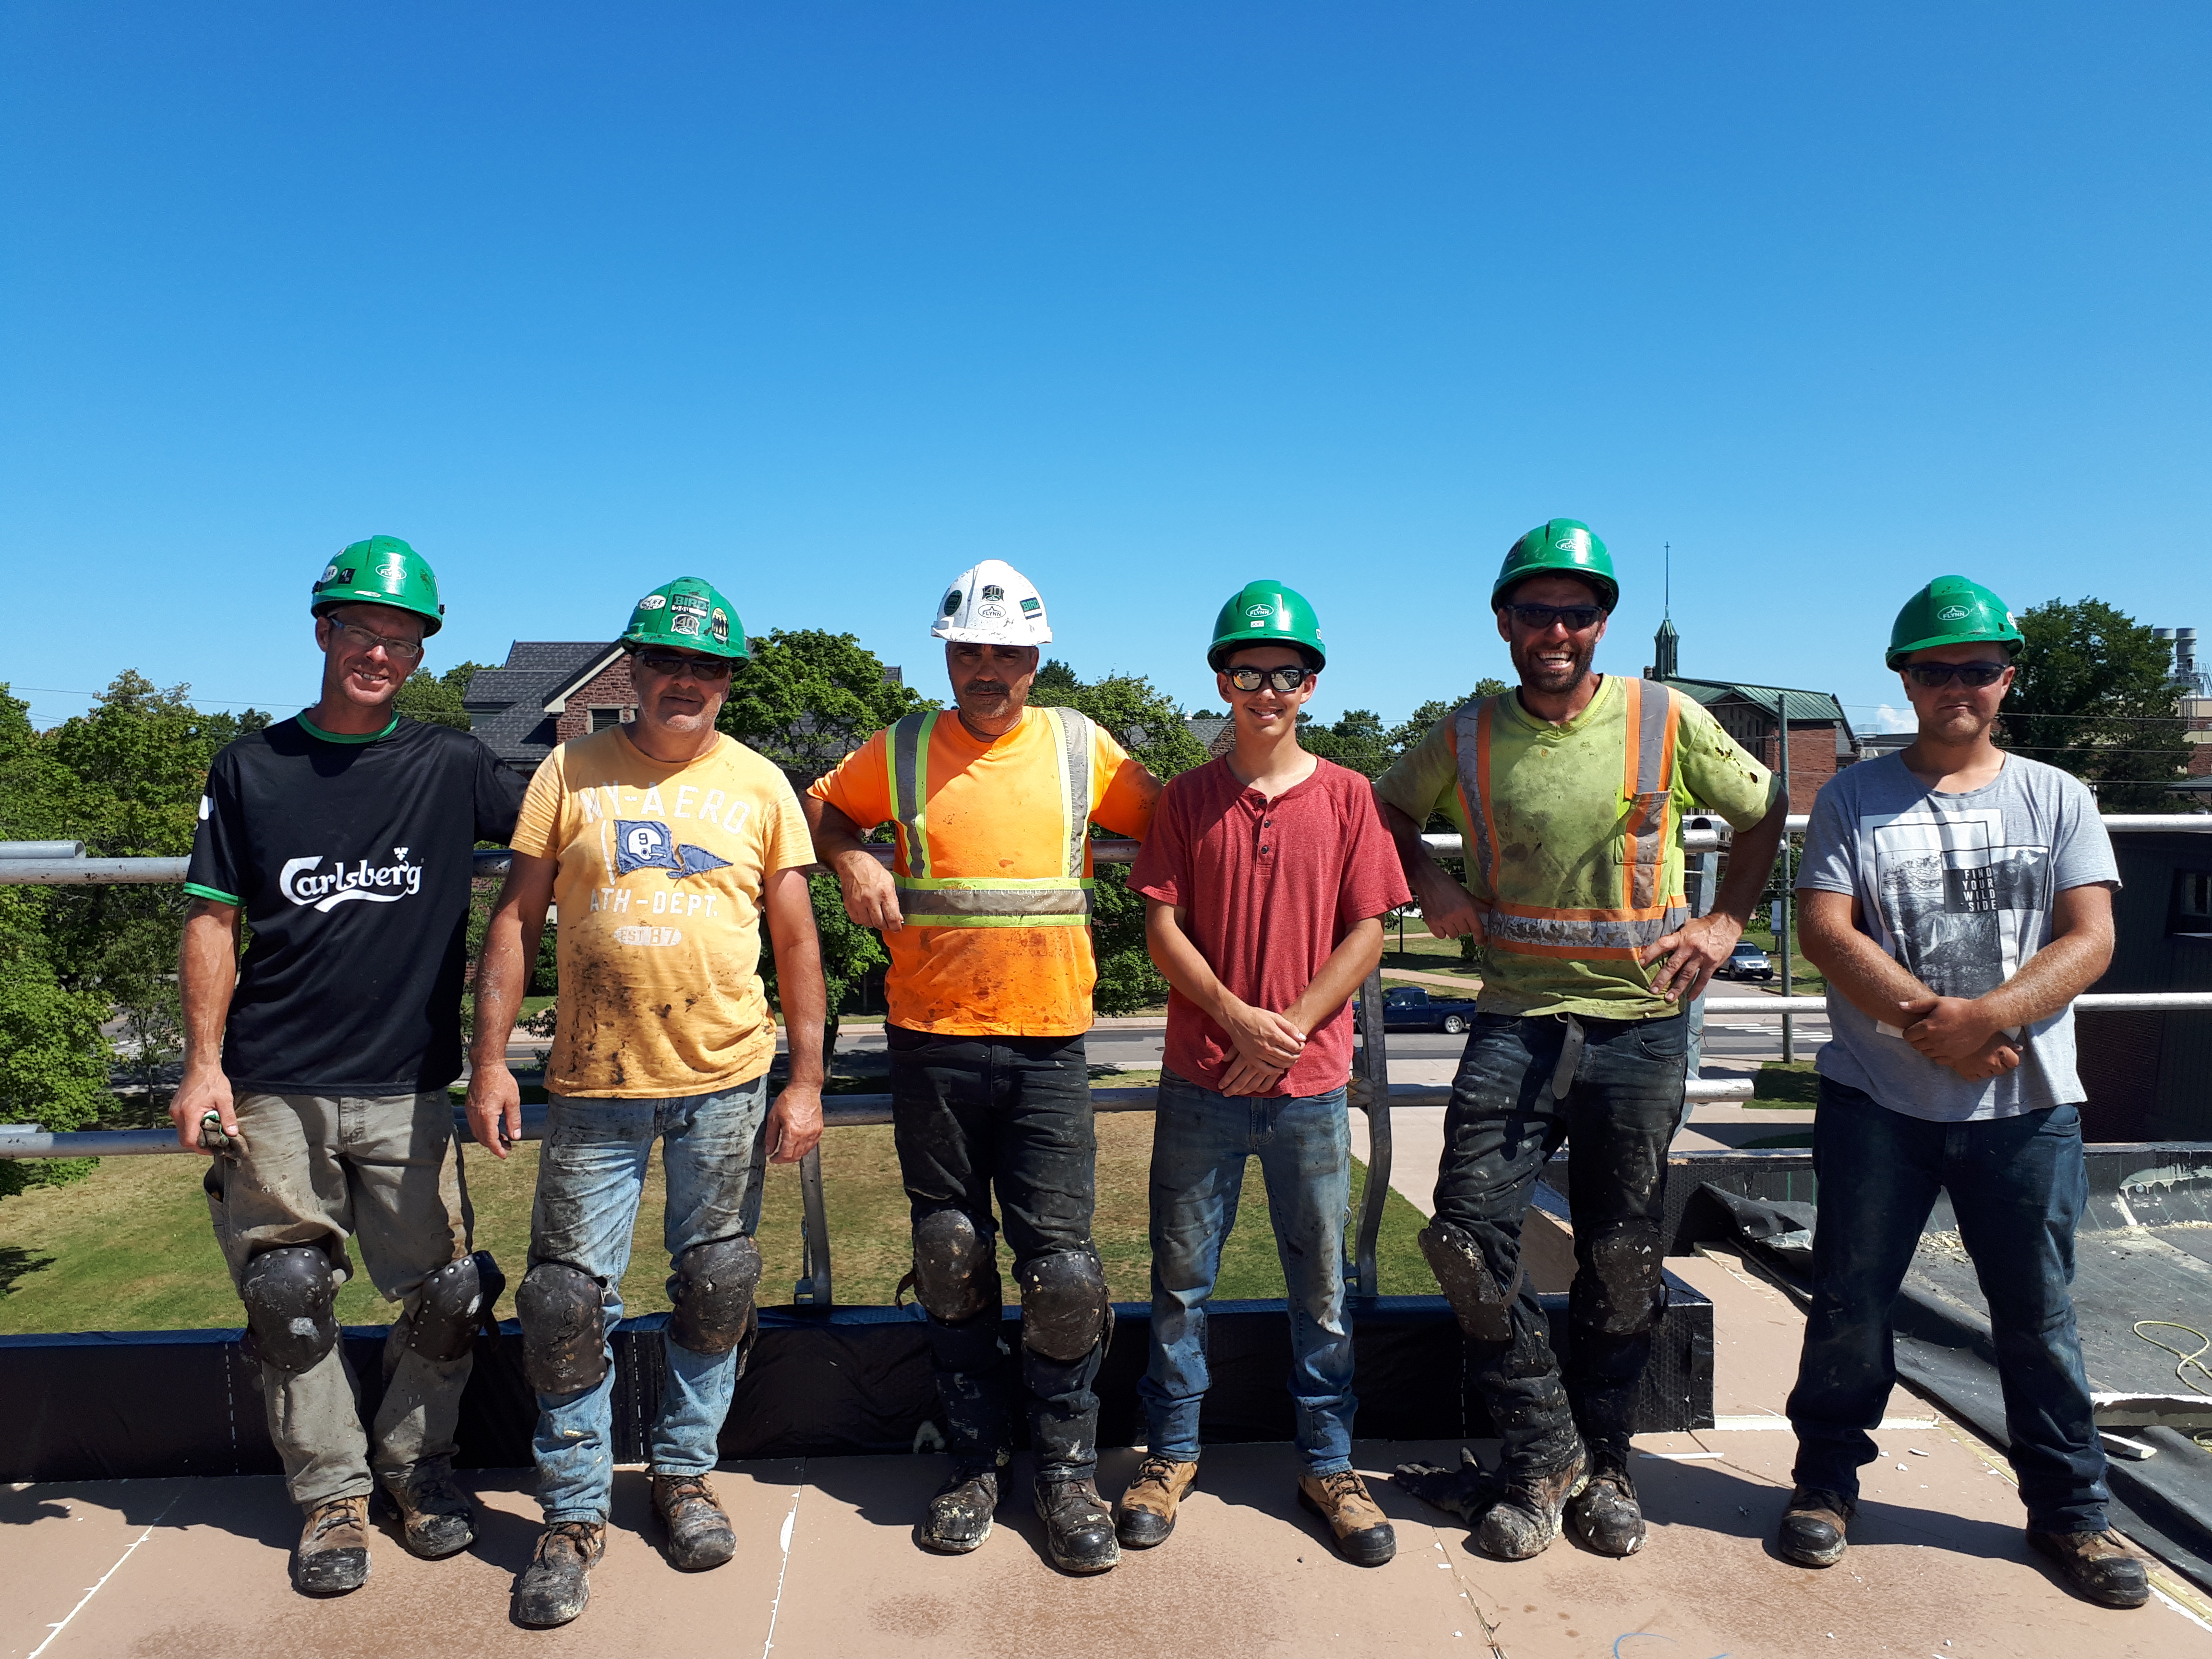 Six construction workers